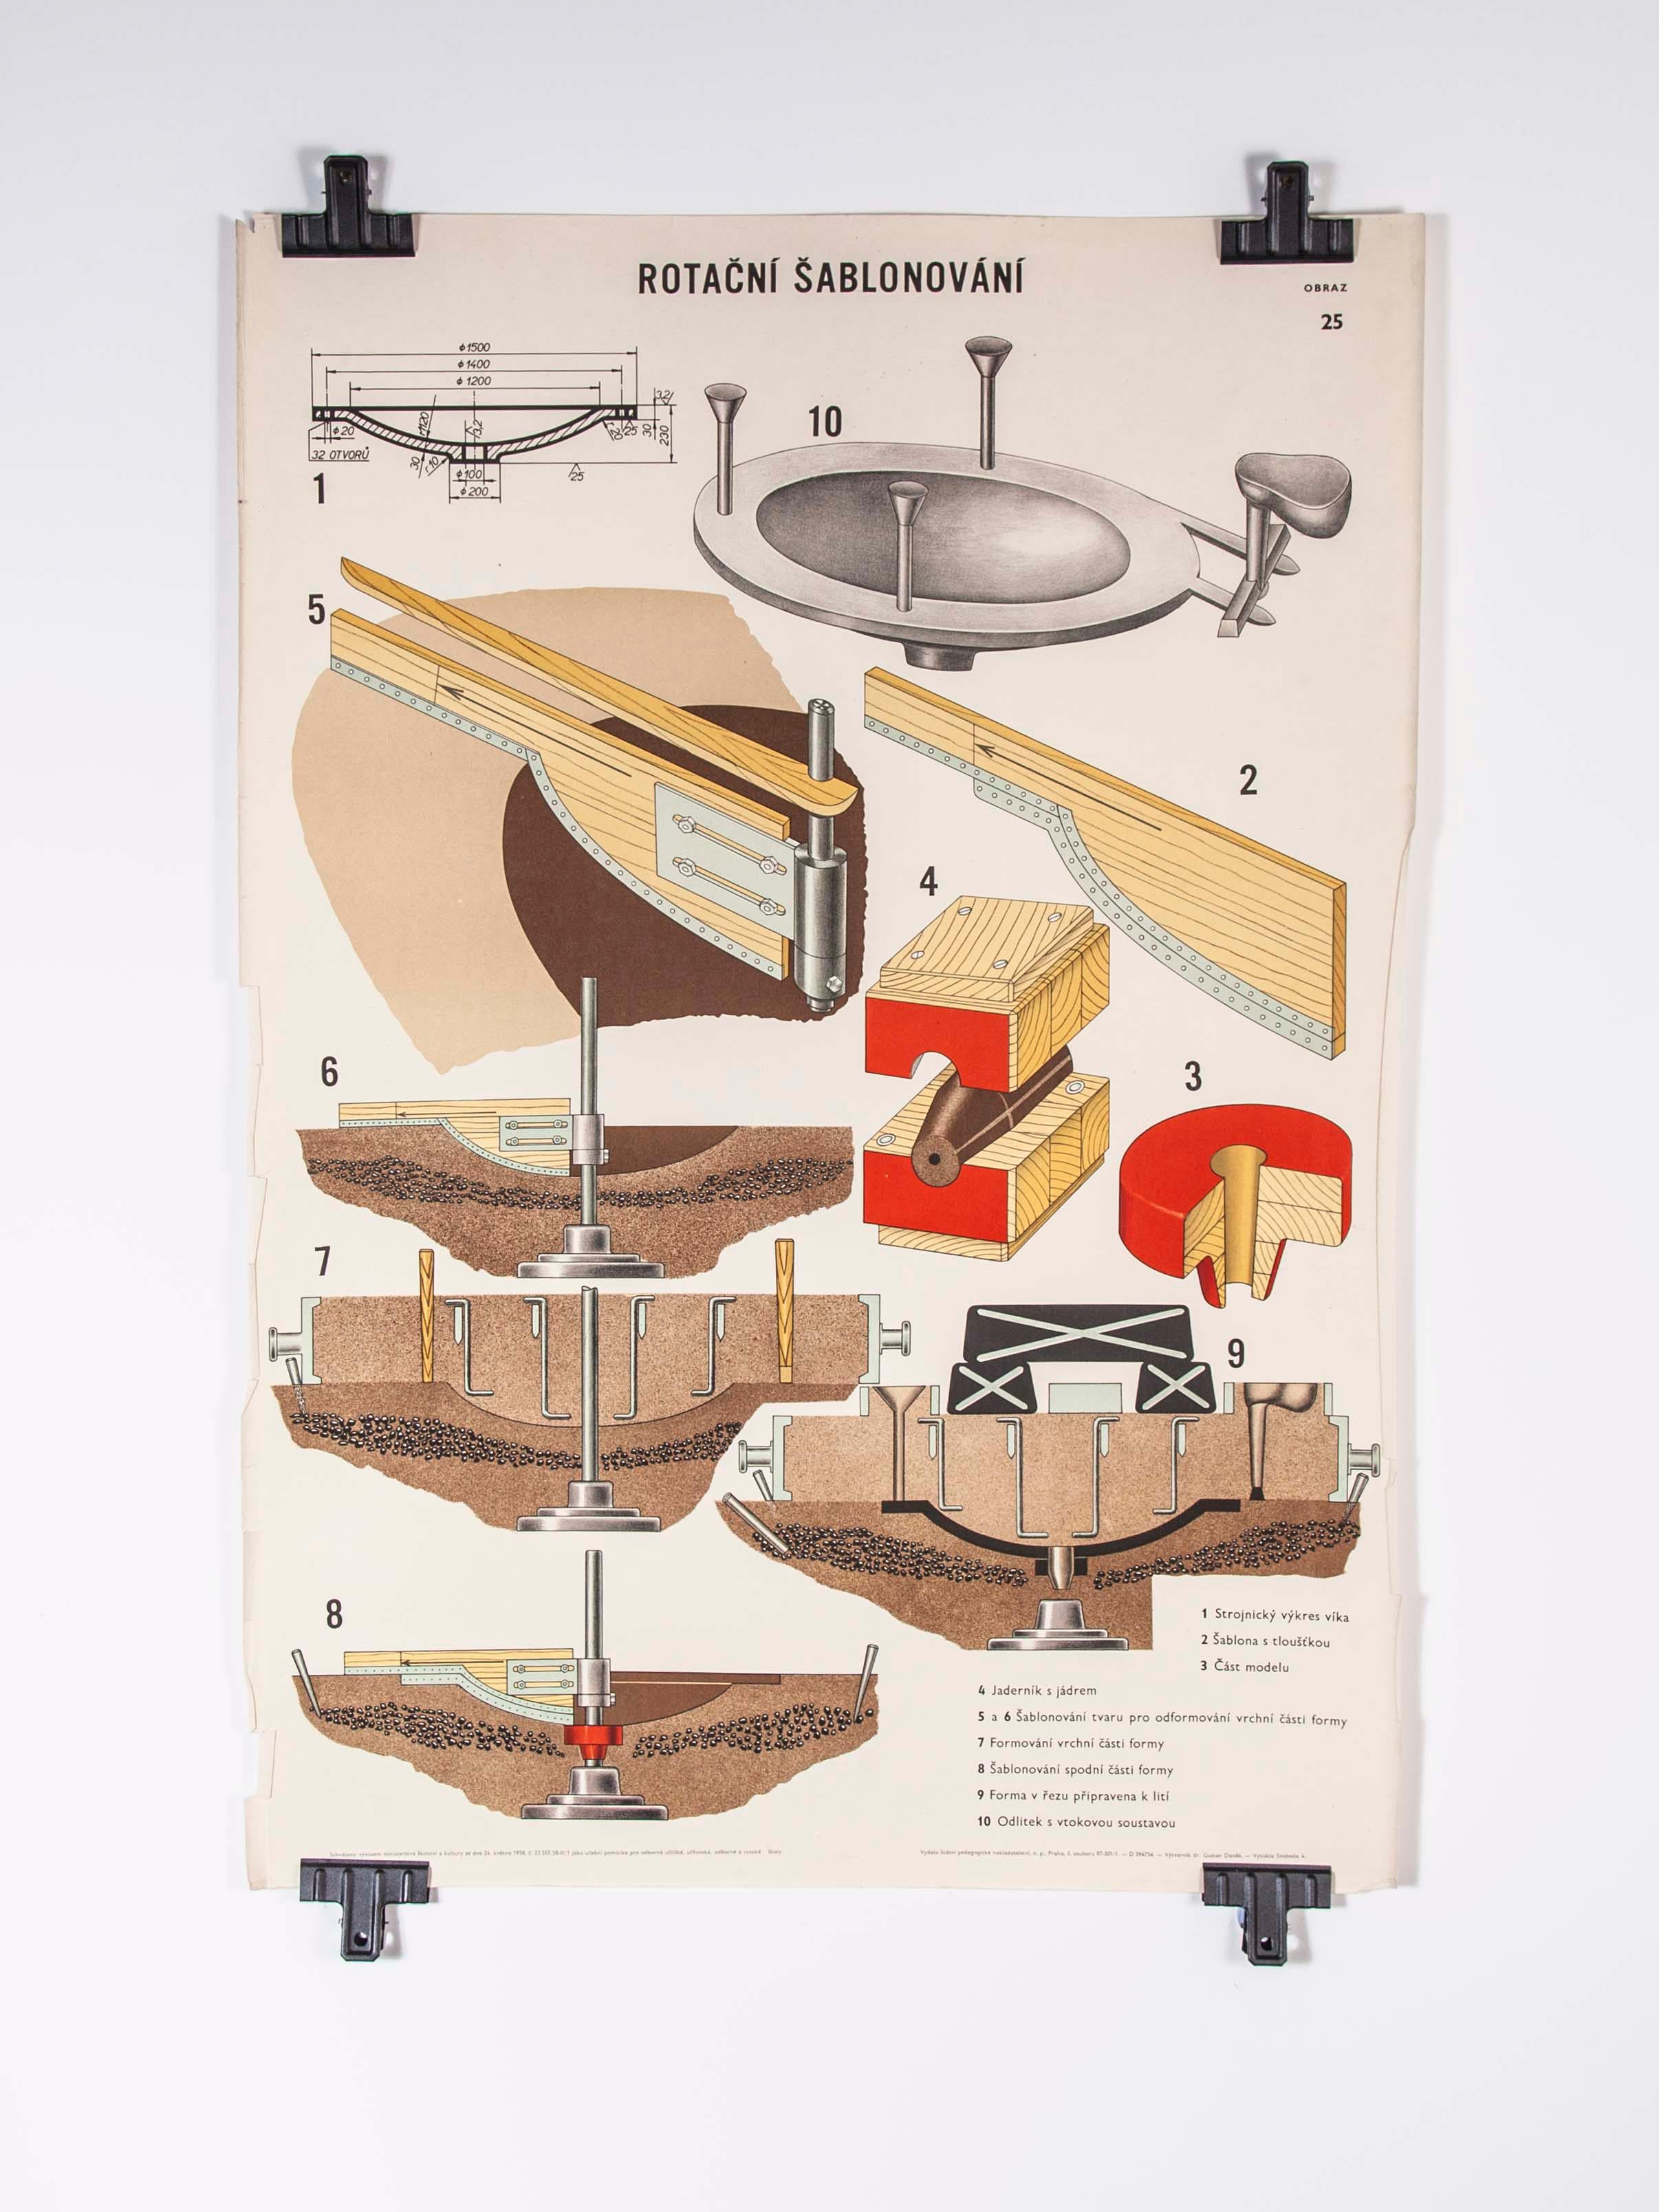 Czech technical industrial drawing, foundry mould engineering poster – 26

Sourced from an old engineering workshop in the Czech Republic, an amazing series of technical Industrial drawings explaining the process of sand casting and creating the